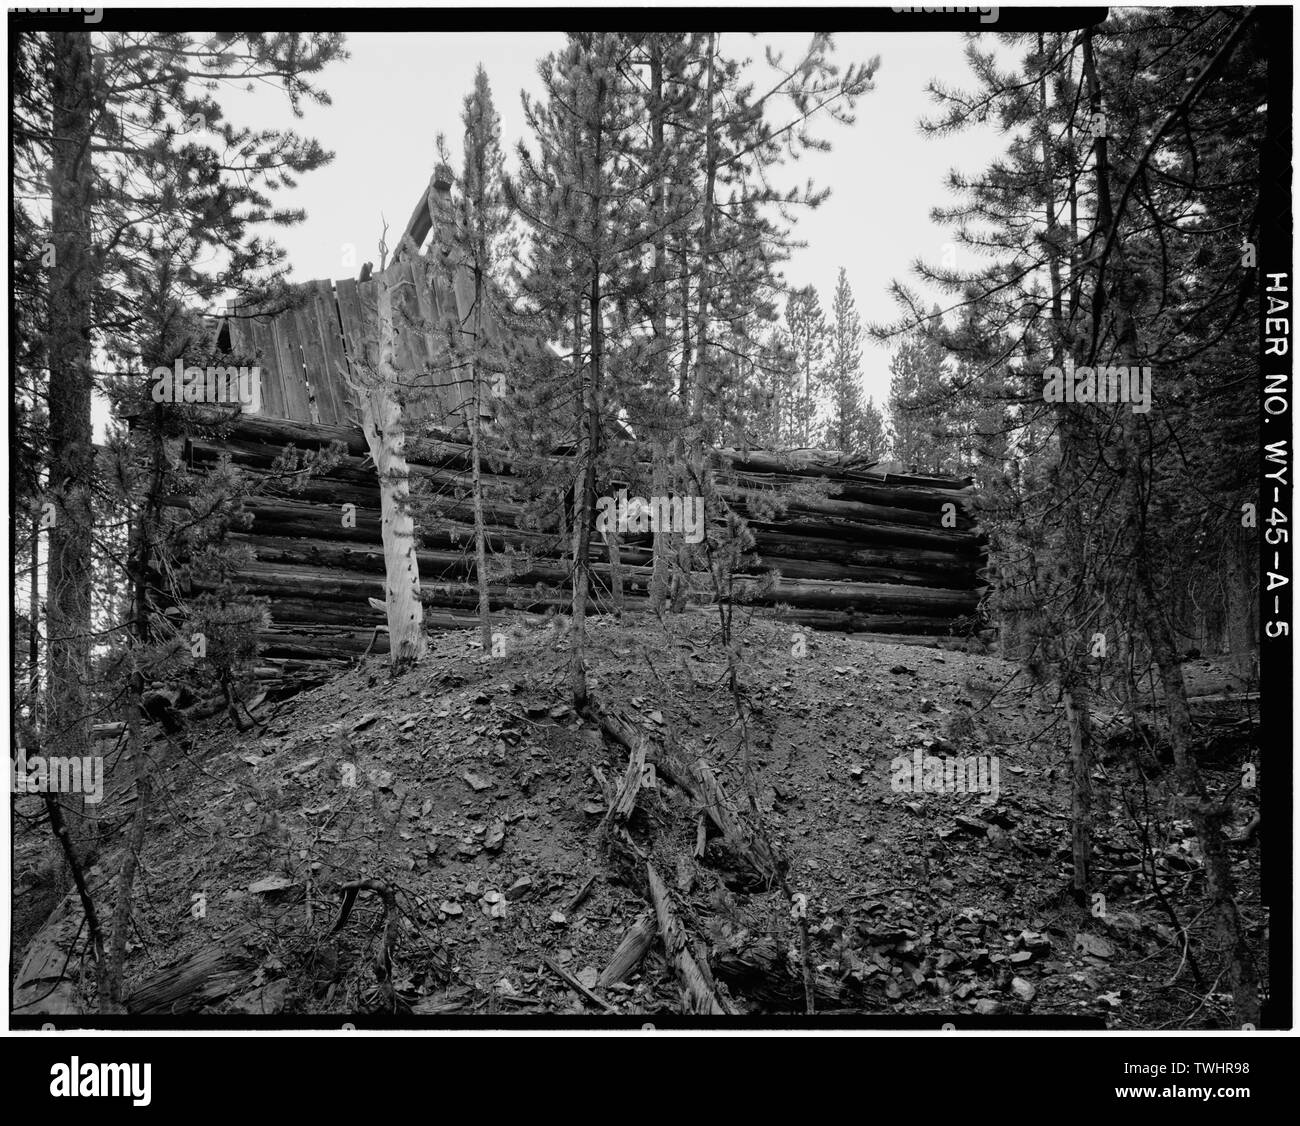 SHAFT HOUSE, EAST ELEVATION; VIEW TO THE NORTHWEST; (WASTE ROCK-SPOIL PILE IN THE FOREGROUND). - Joker Mine, Shafthouse, Medicine Bow National Forest, Northwest of Keystone, Keystone, Albany County, WY; Oneida Mining Company Stock Photo